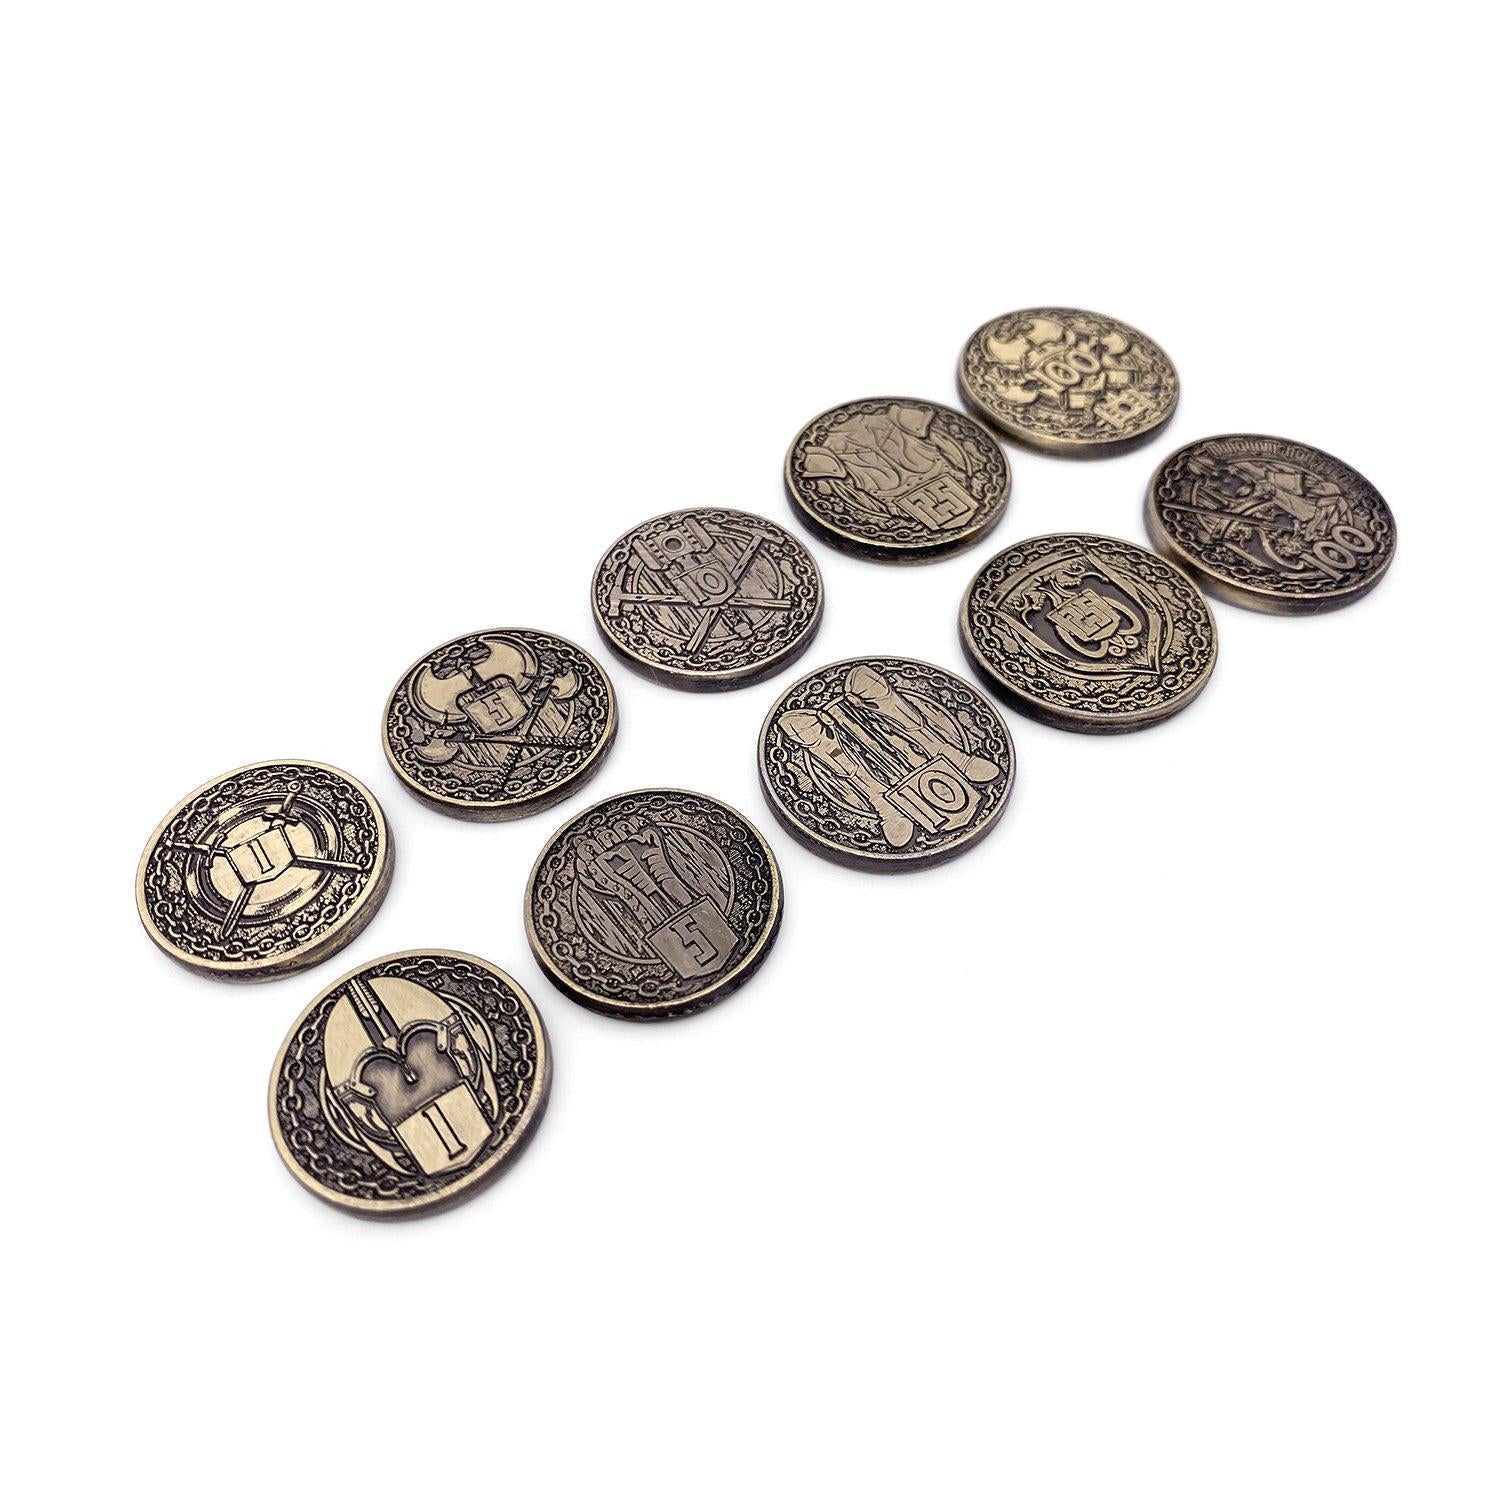 Adventure Coins - Fighter Metal Coins Set of 10